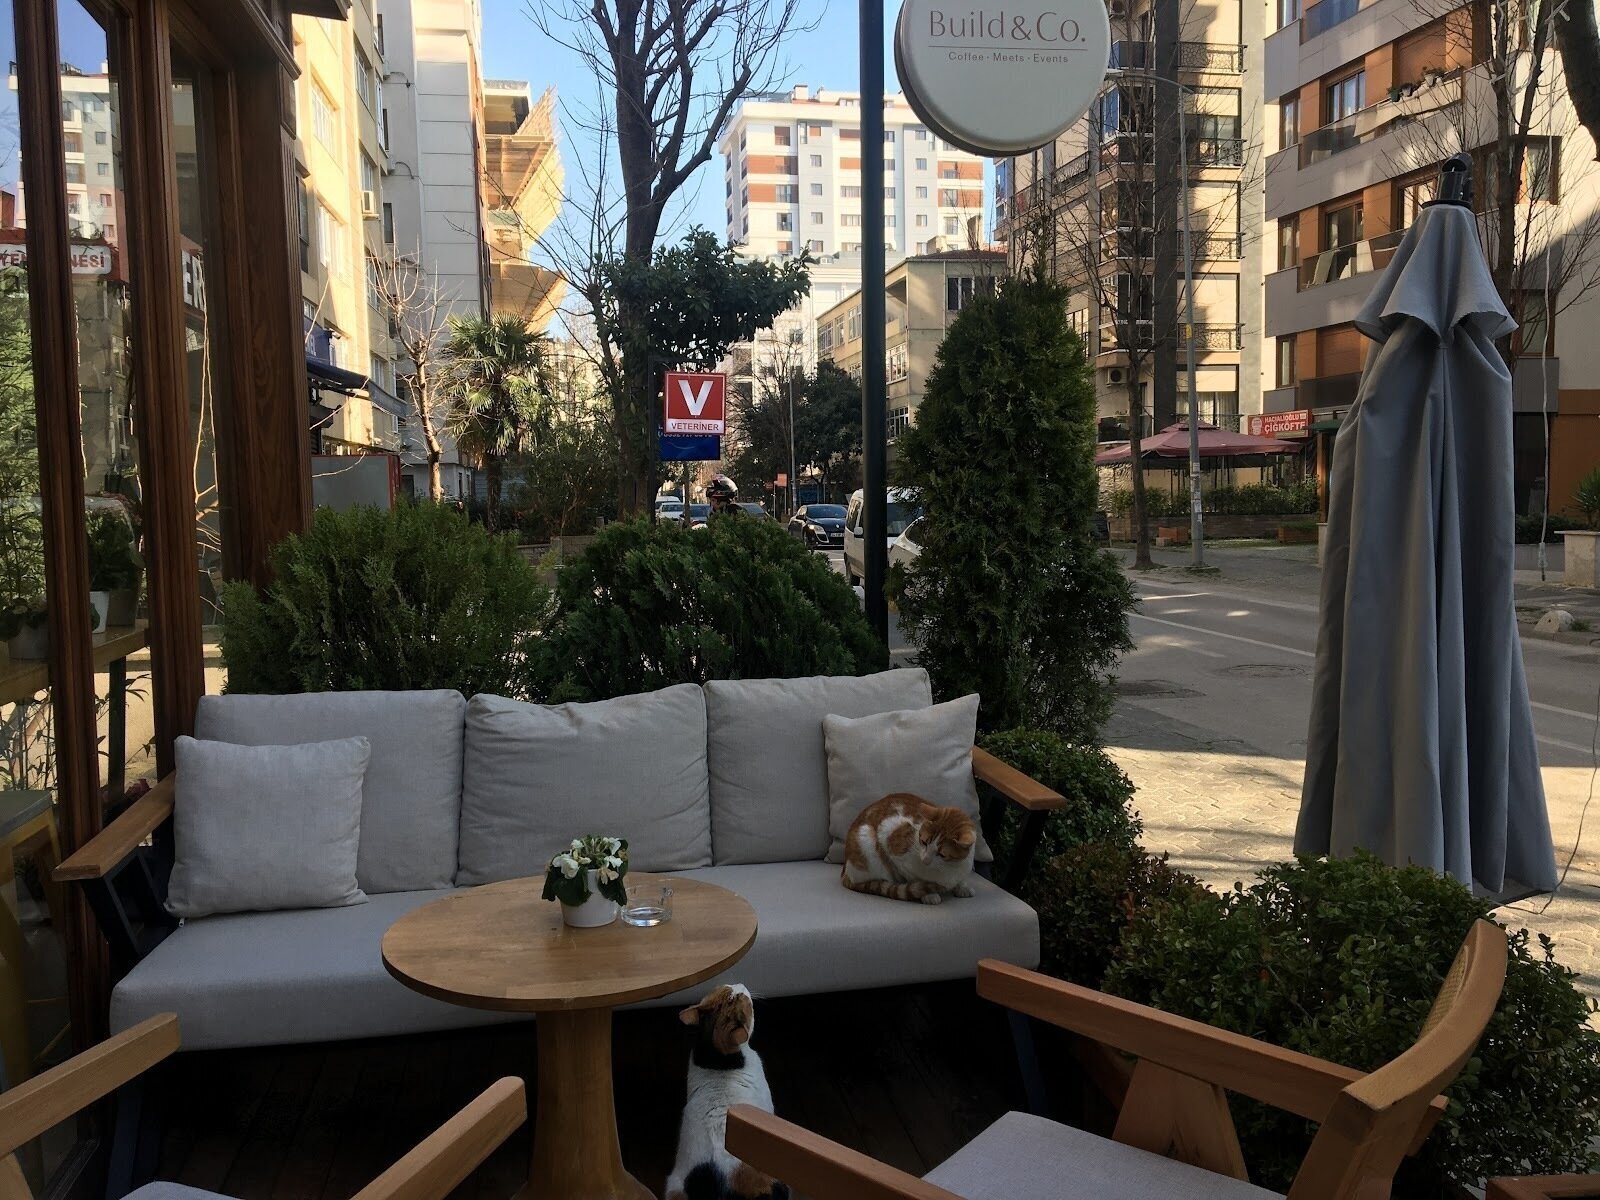 <span class="translation_missing" title="translation missing: en.meta.location_title, location_name: Build&amp;Co. Coffee, city: Istanbul">Location Title</span>